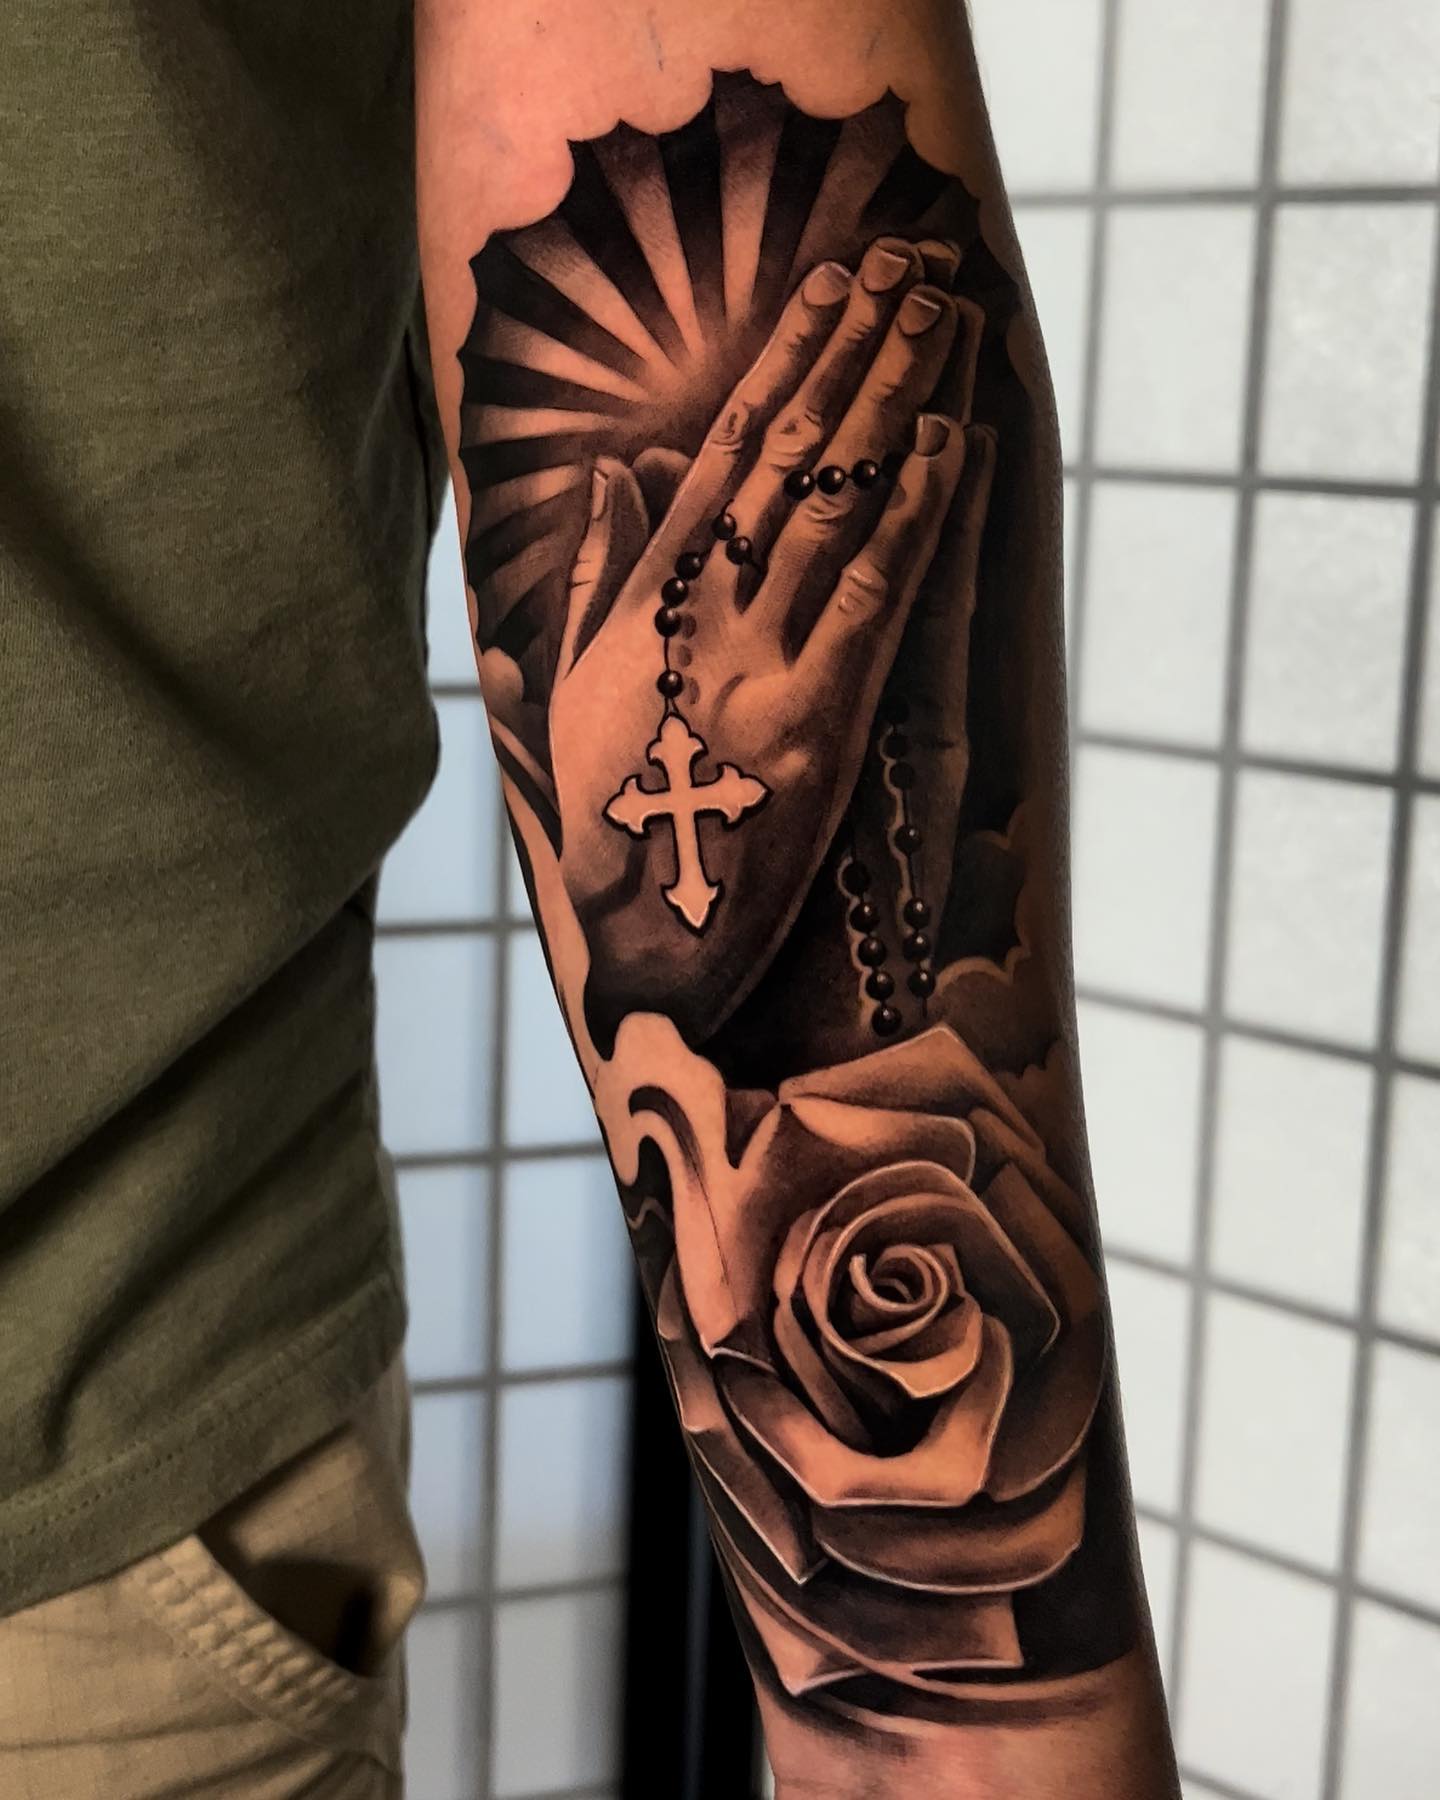 Along with that rose, this tattoo looks super-realistic. To show your love to your religion, this one is a perfect choice for it.